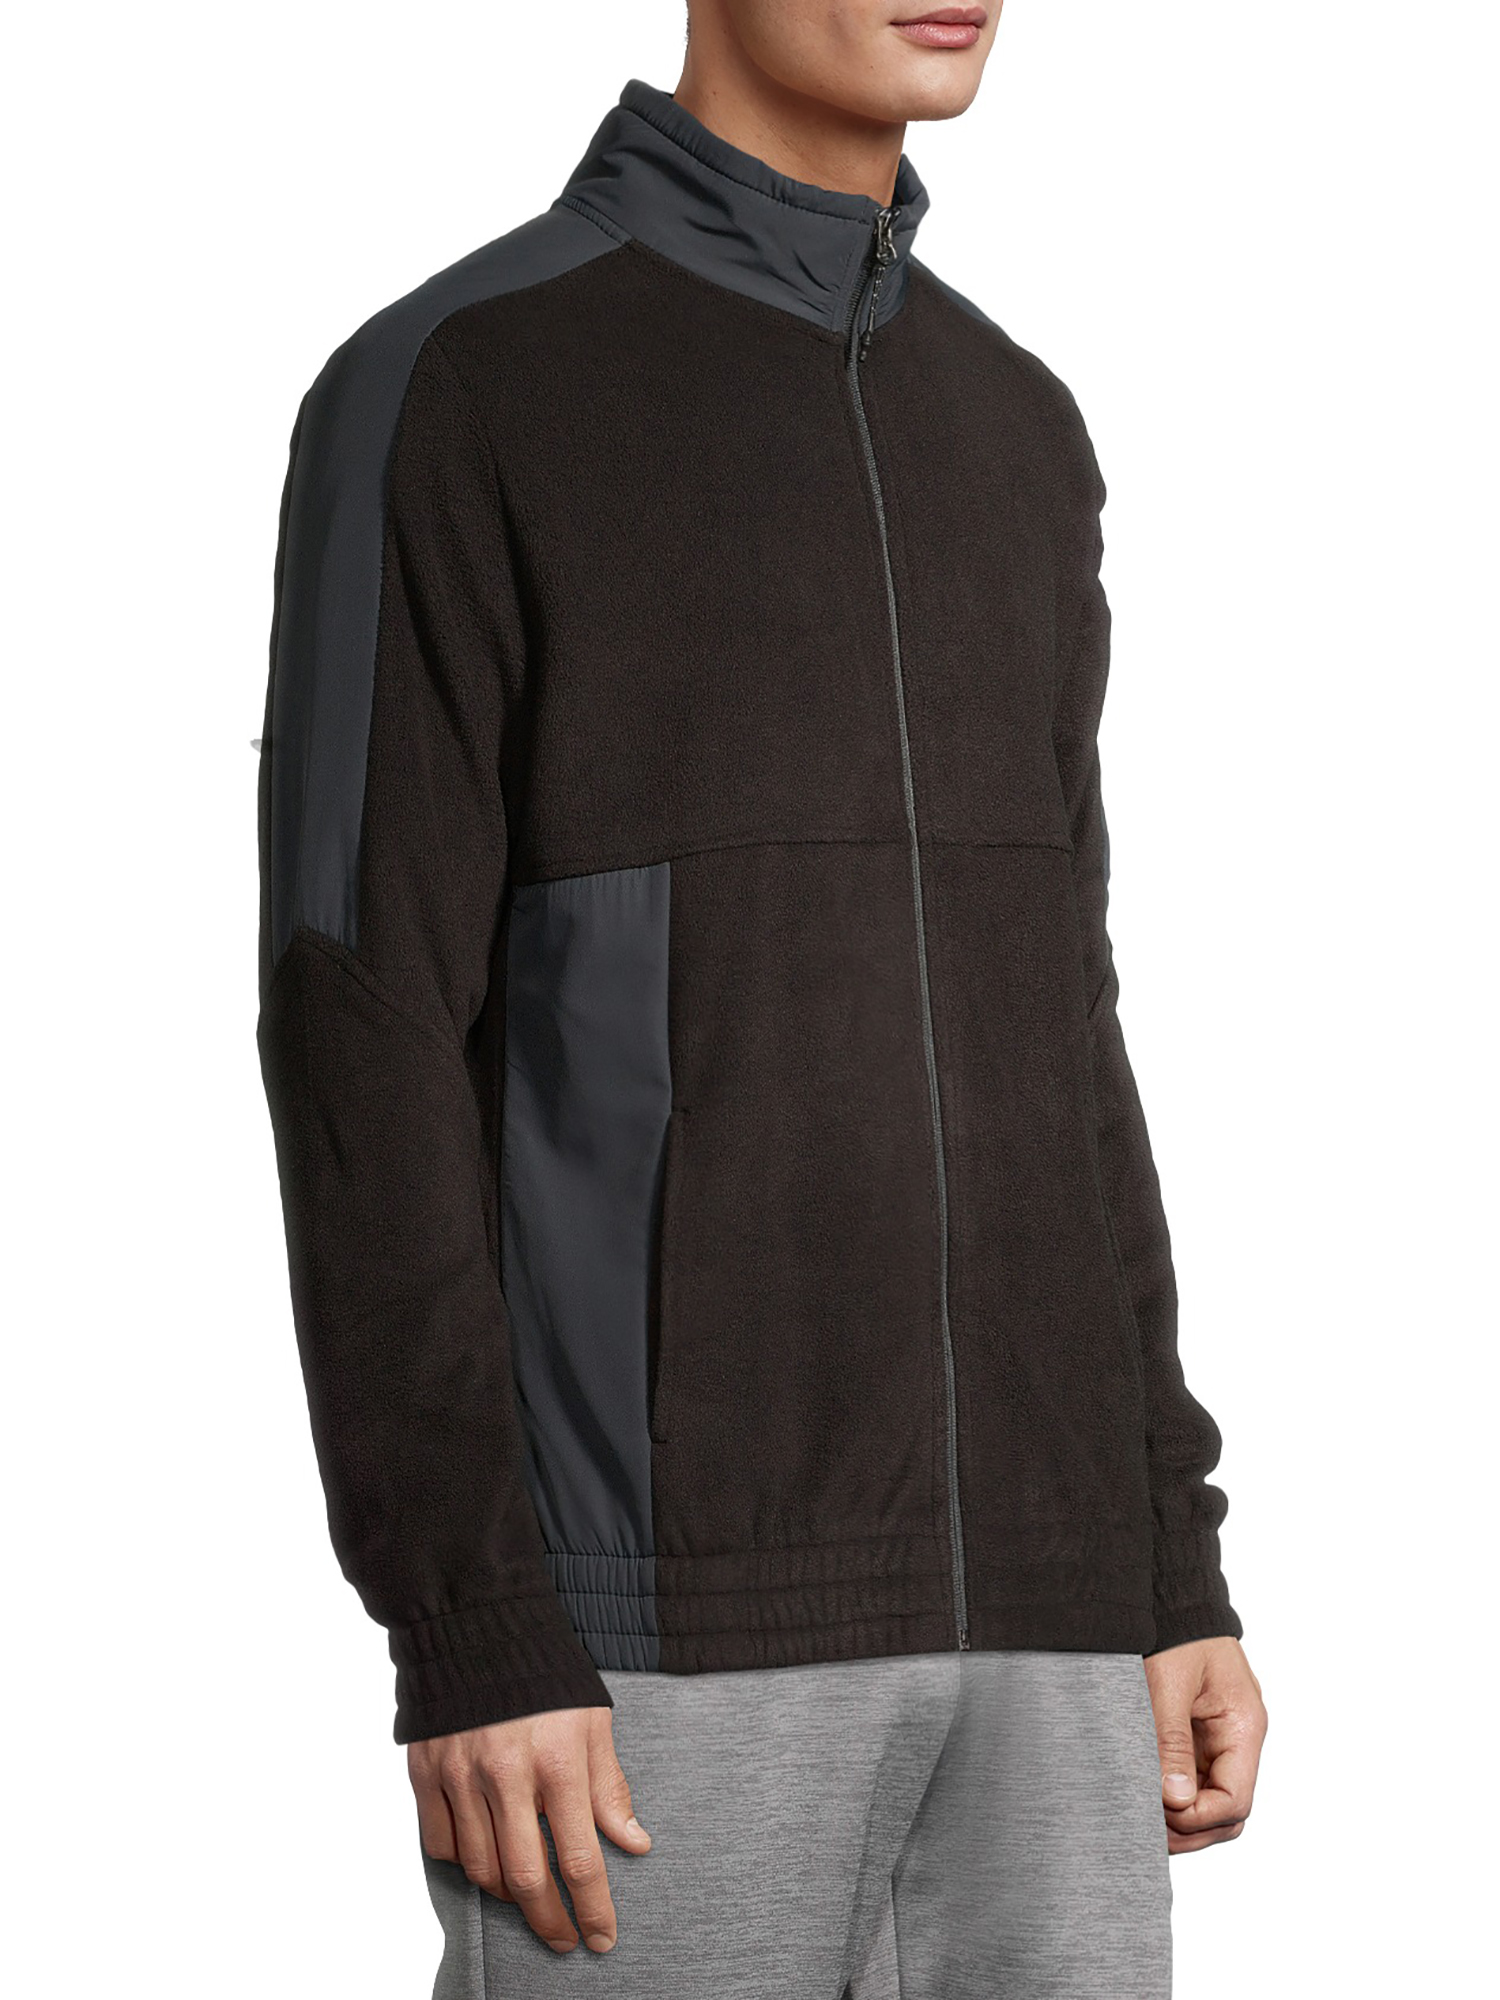 Russell Men's and Big Men's Microfleece Jacket, up to Size 3XL - image 4 of 6